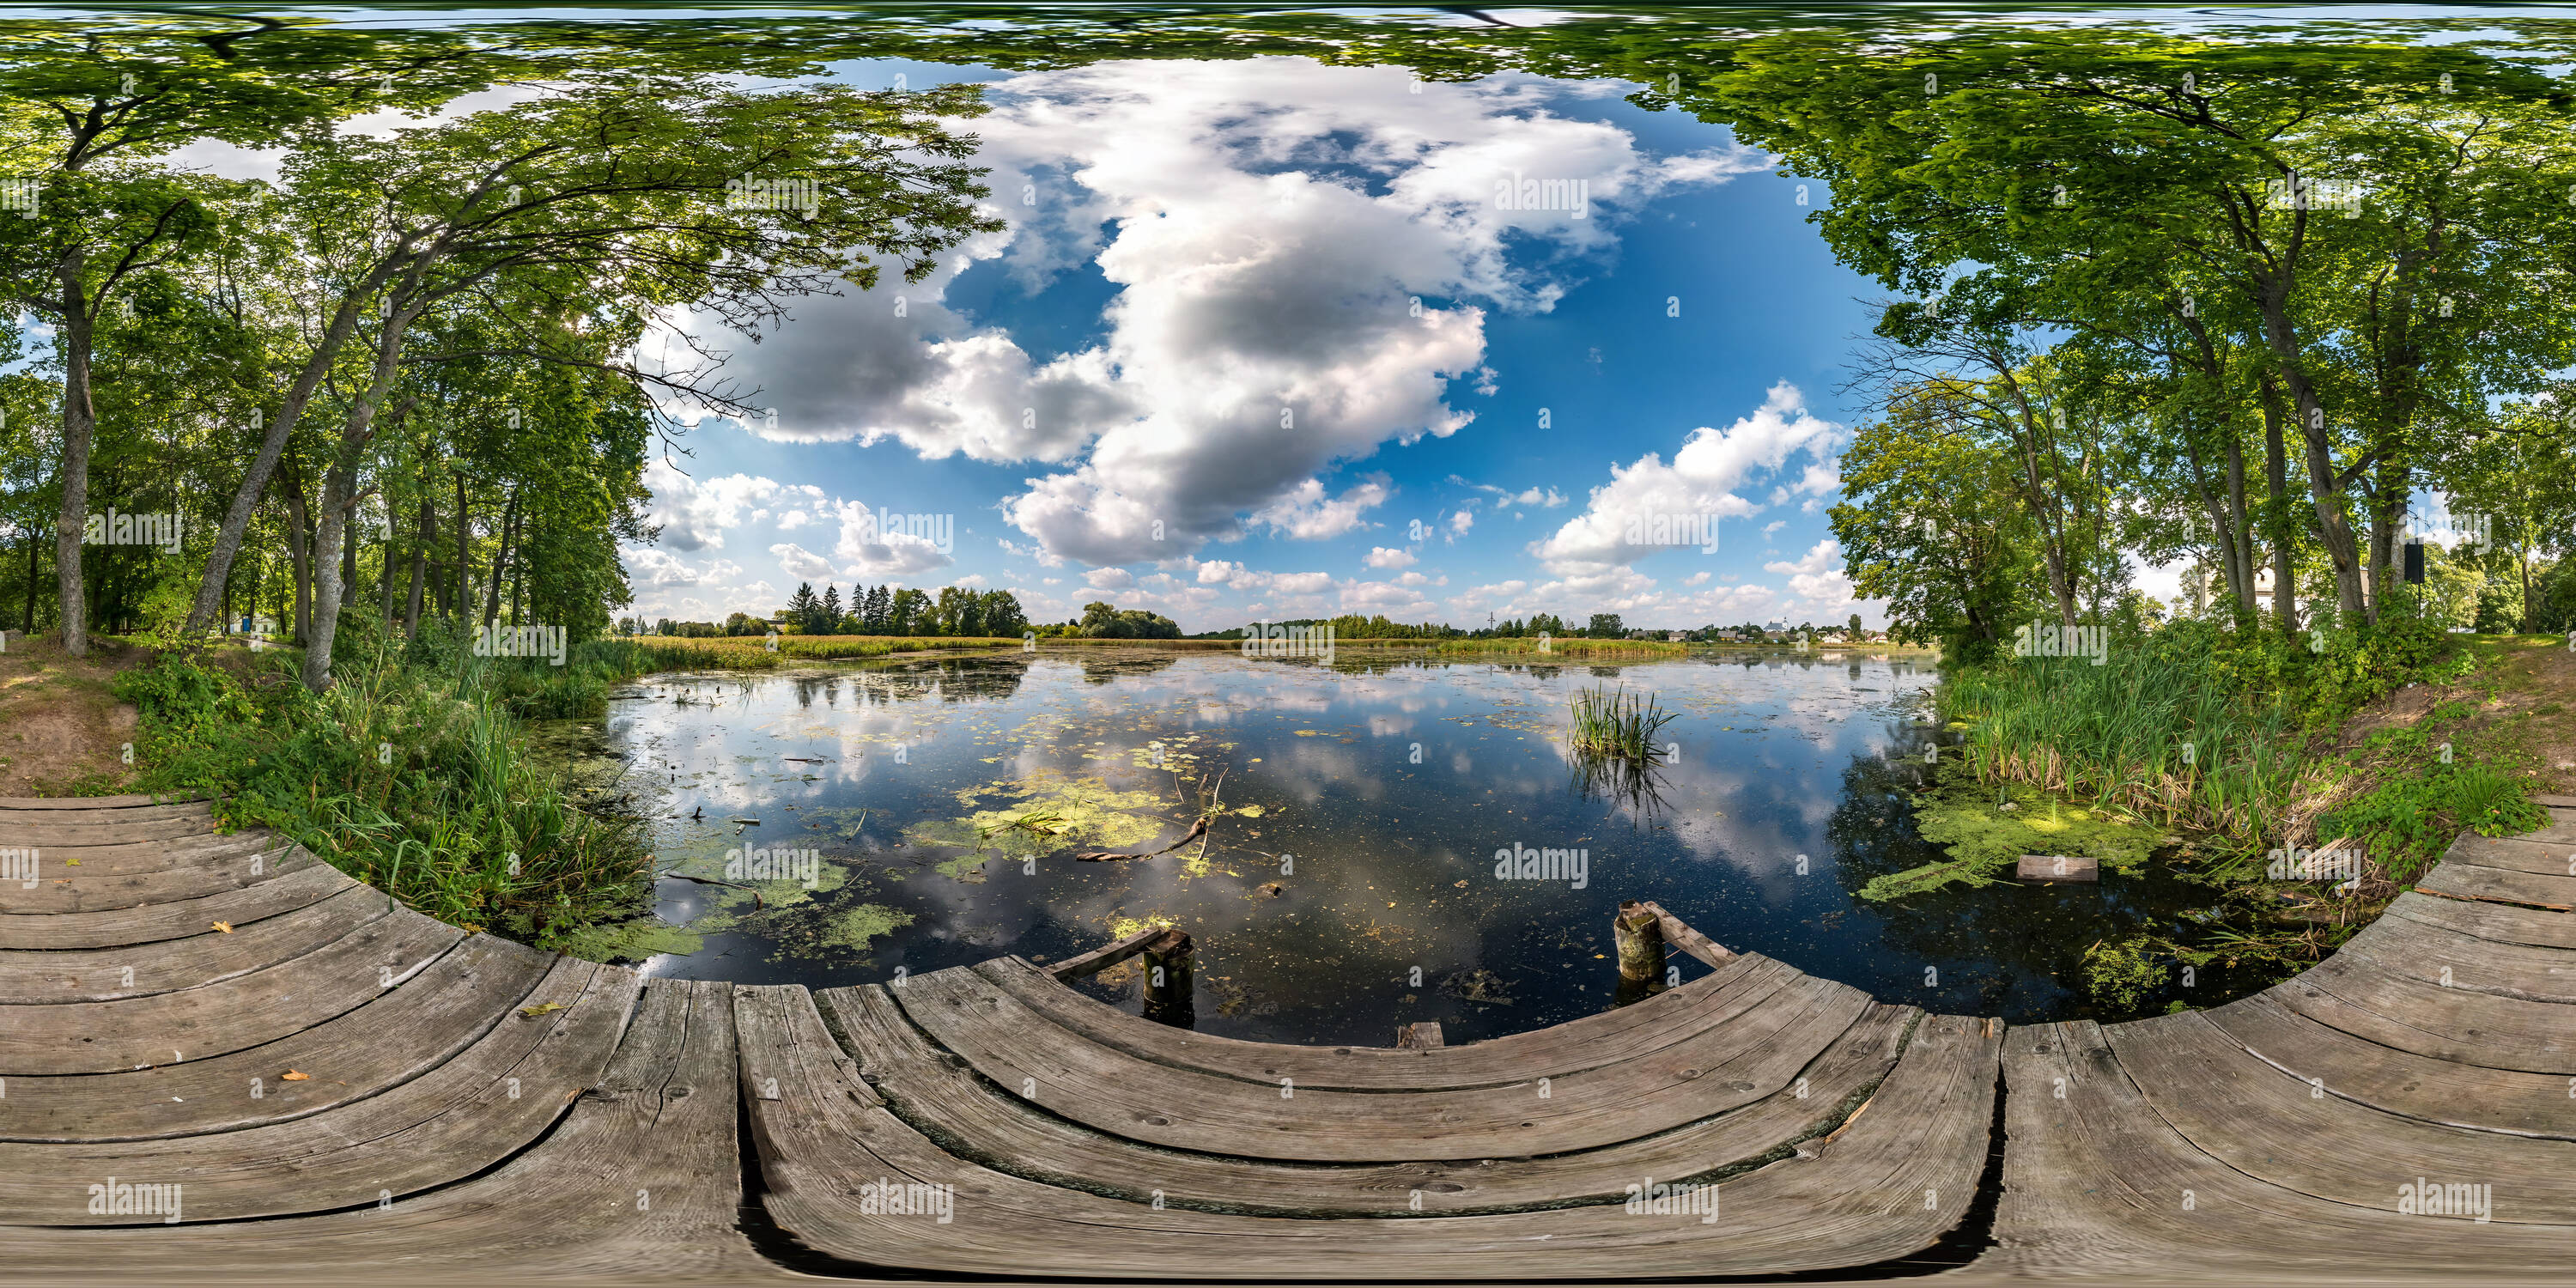 Full Seamless Spherical Hdri Panorama 360 Degrees Angle View On Wooden Pier Among The Bushes Of Forest Near River Or Lake In Equirectangular Projectio 2A62K6T 